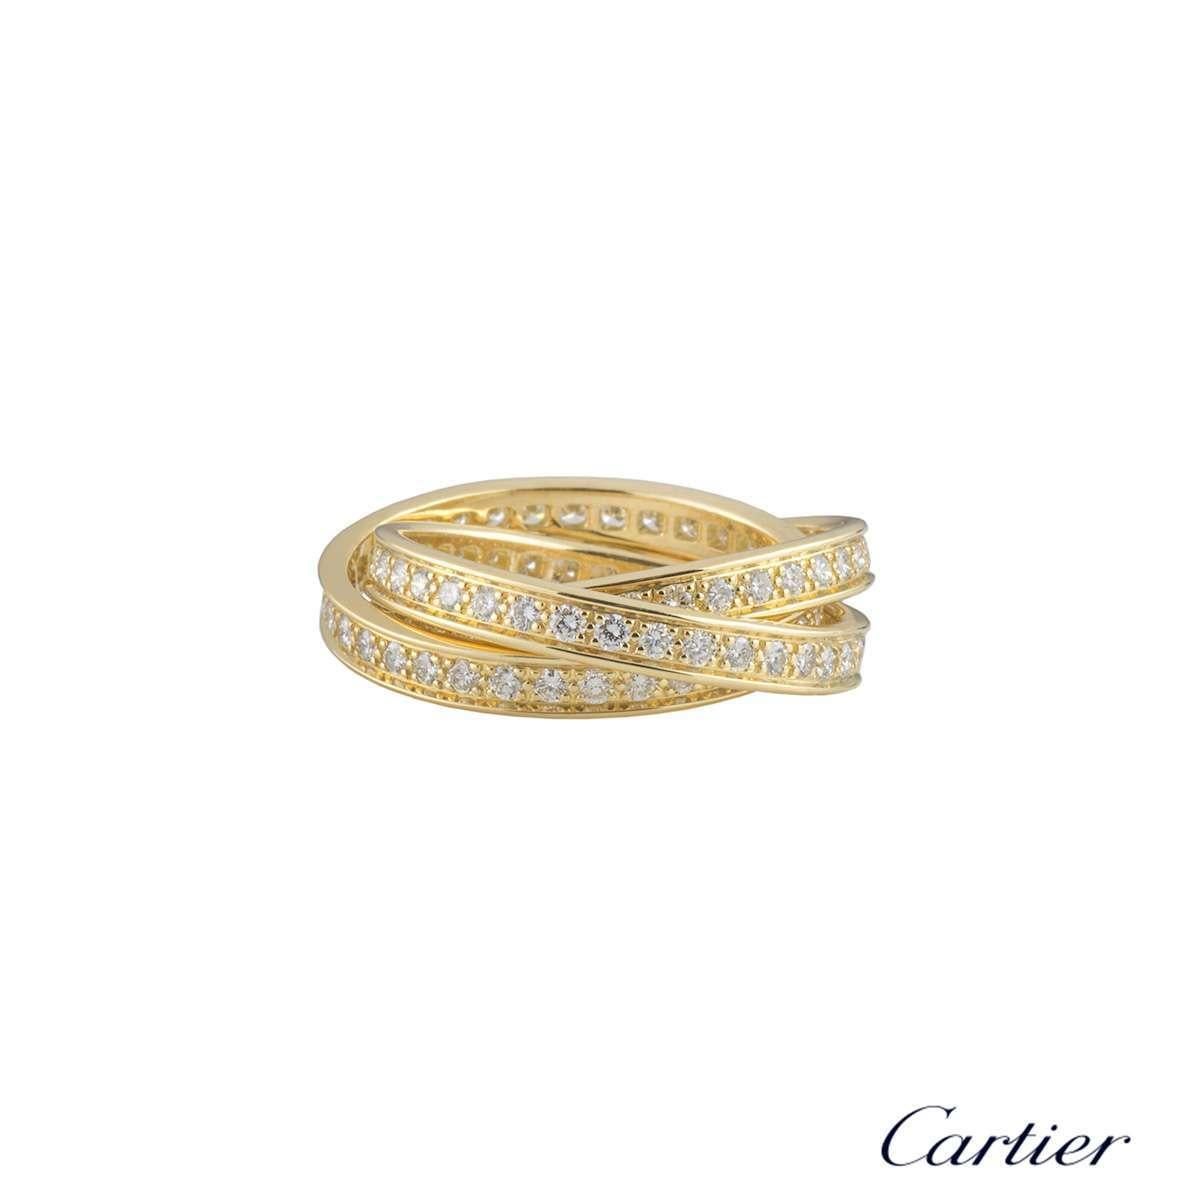 An iconic 18k yellow gold diamond set Cartier ring from the Trinity de Cartier collection. The ring is composed of three entwined round brilliant cut diamond set bands each 3mm in width, totalling approximately 1.55ct, G+ colour and VS+ clarity. The